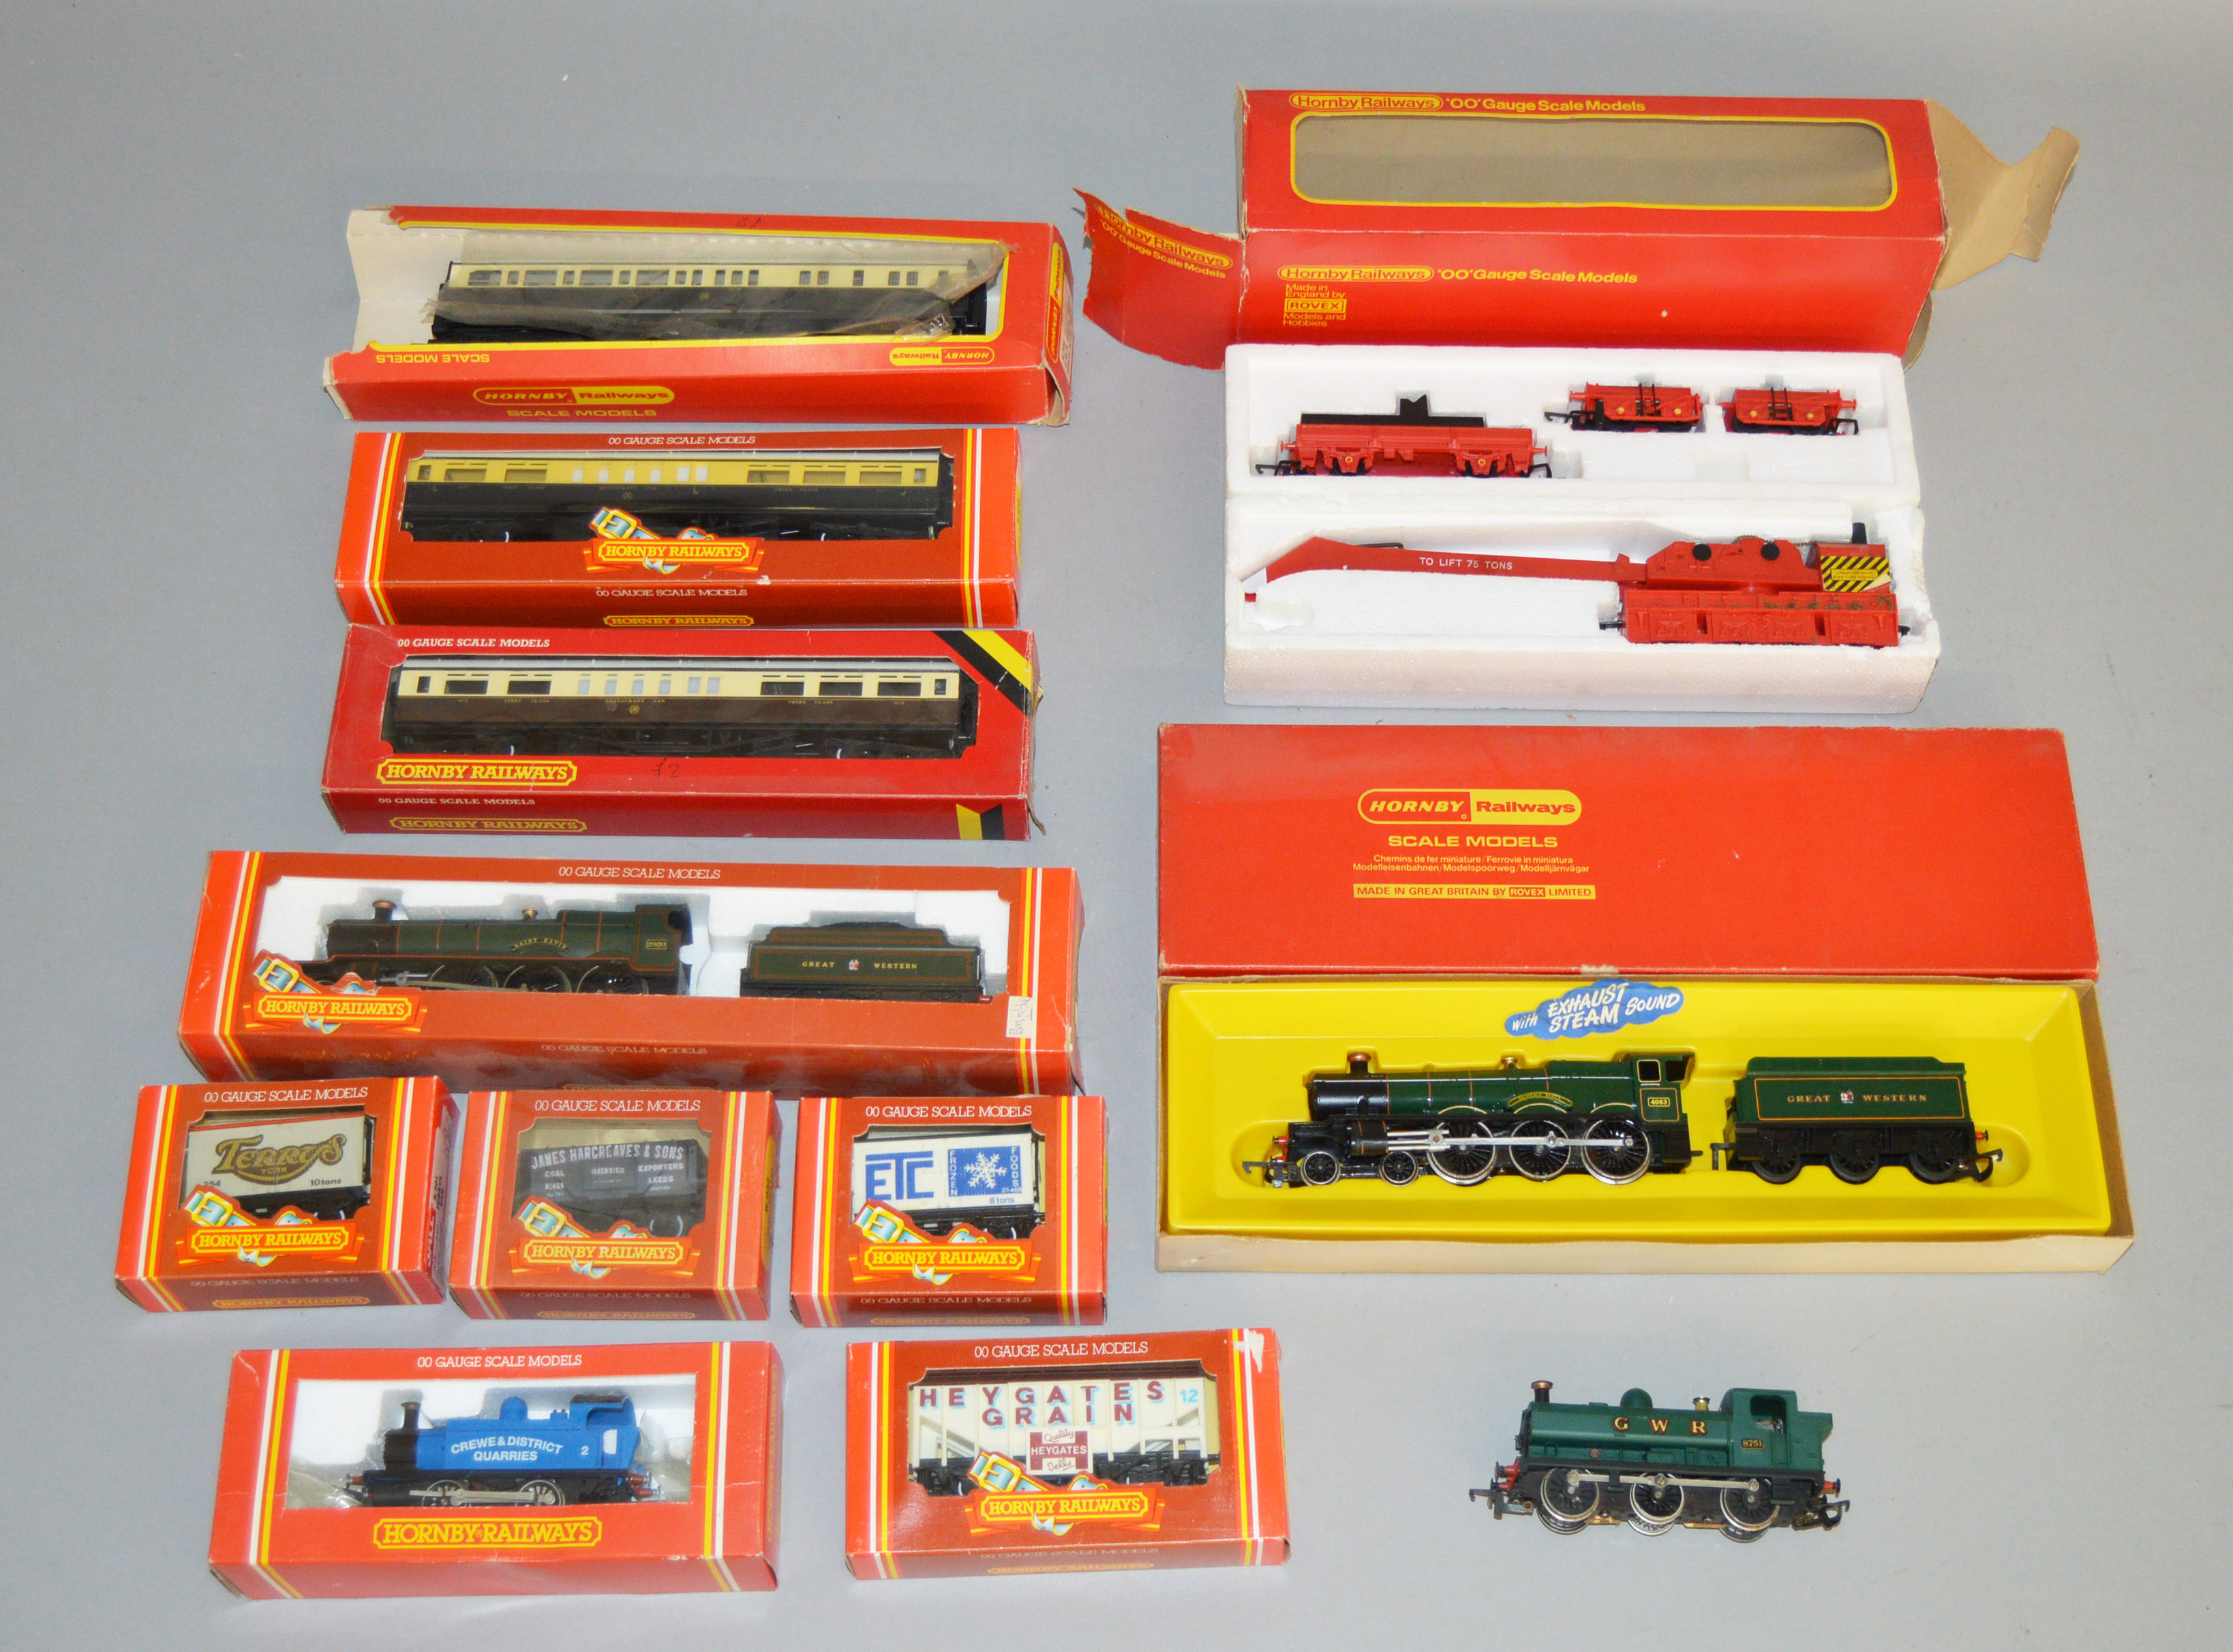 OO Gauge. 3 boxed Hornby Locomotives, R.759 GWR 4-6-0 Hall, R.796 0-4-0T Crewe & District Quarries